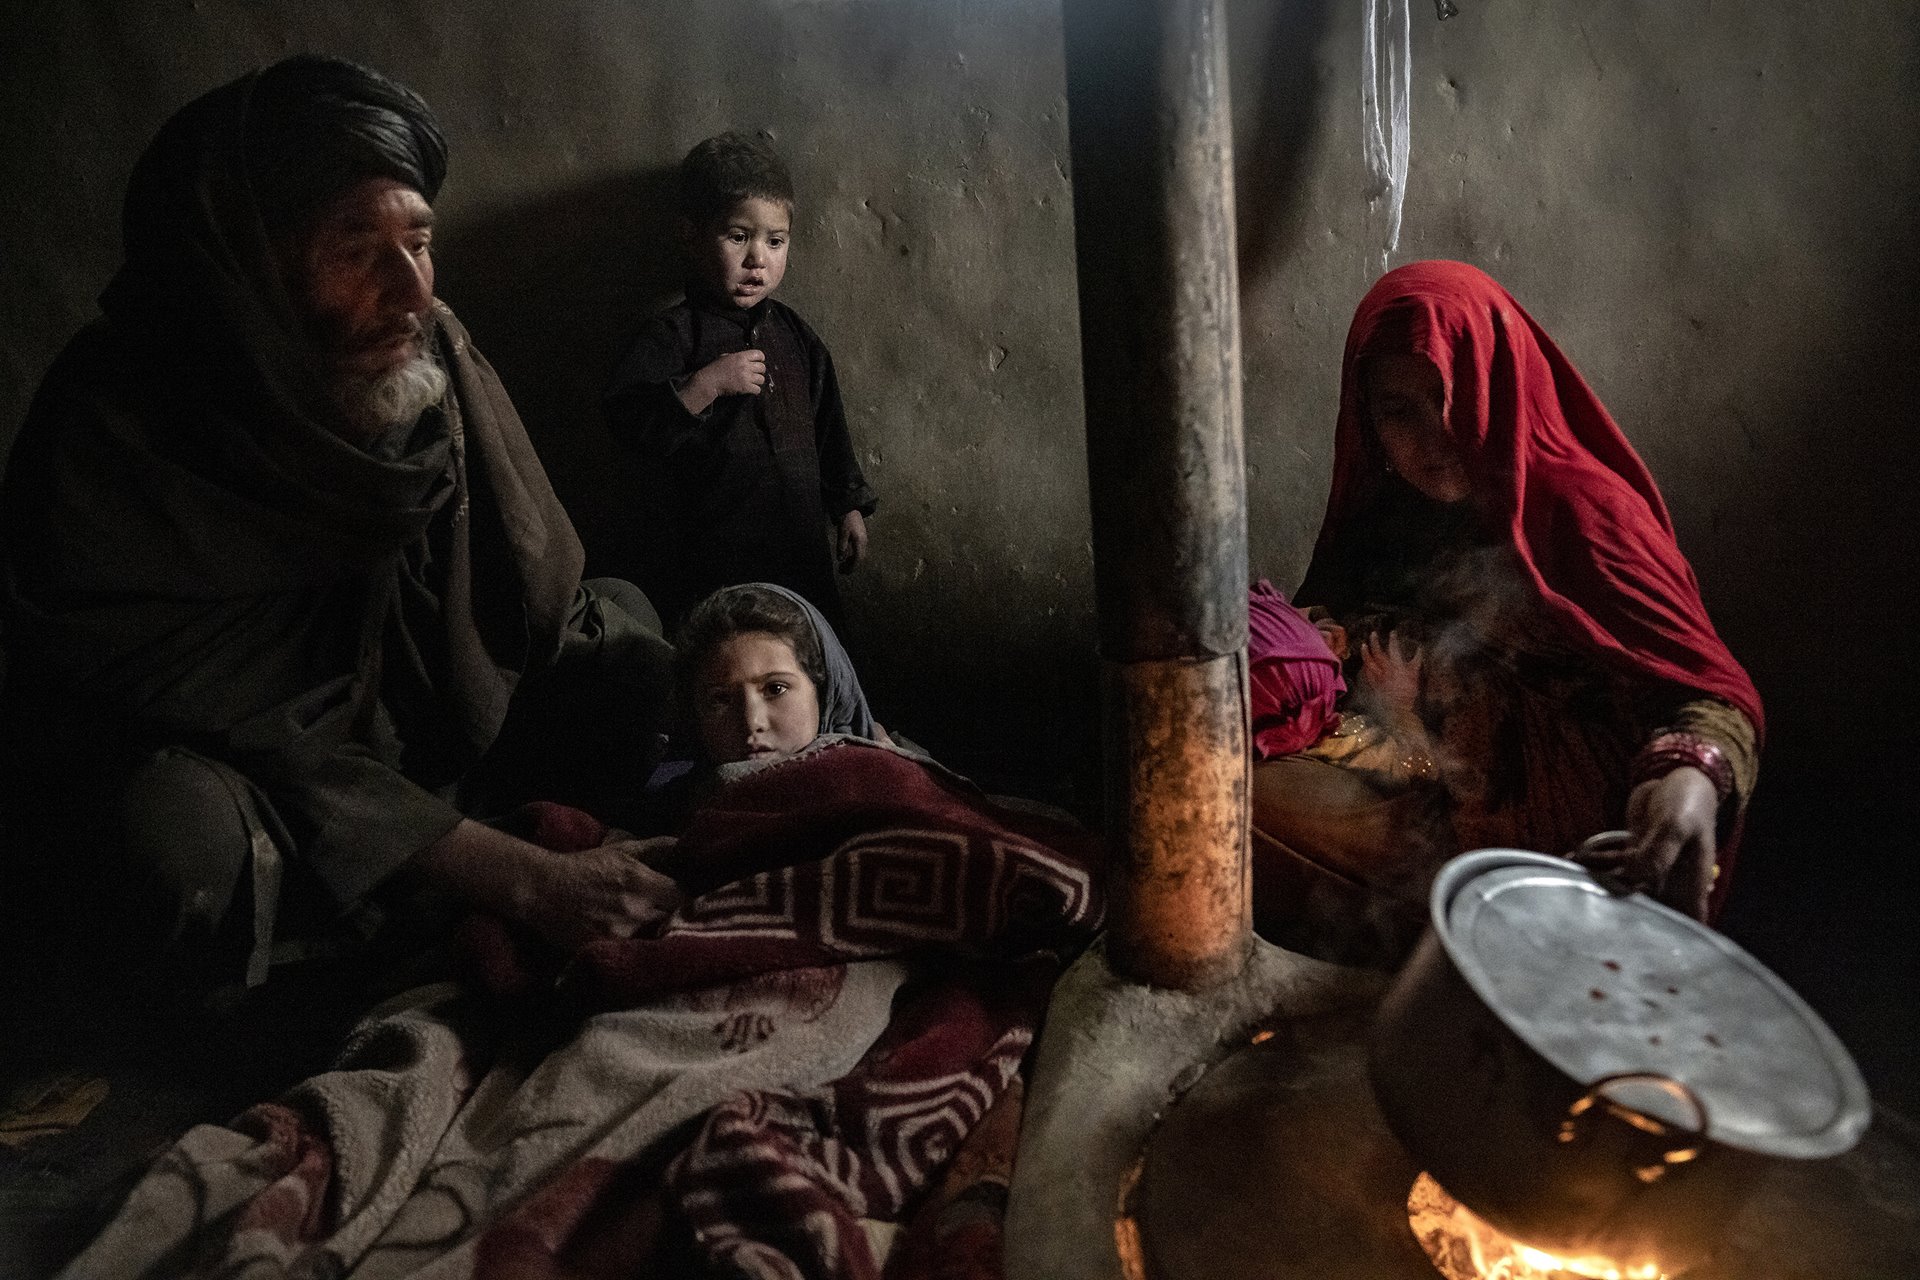 An Afghan couple care for their sick child in a camp for internally displaced people near Kabul, Afghanistan. They cannot afford medical treatment.